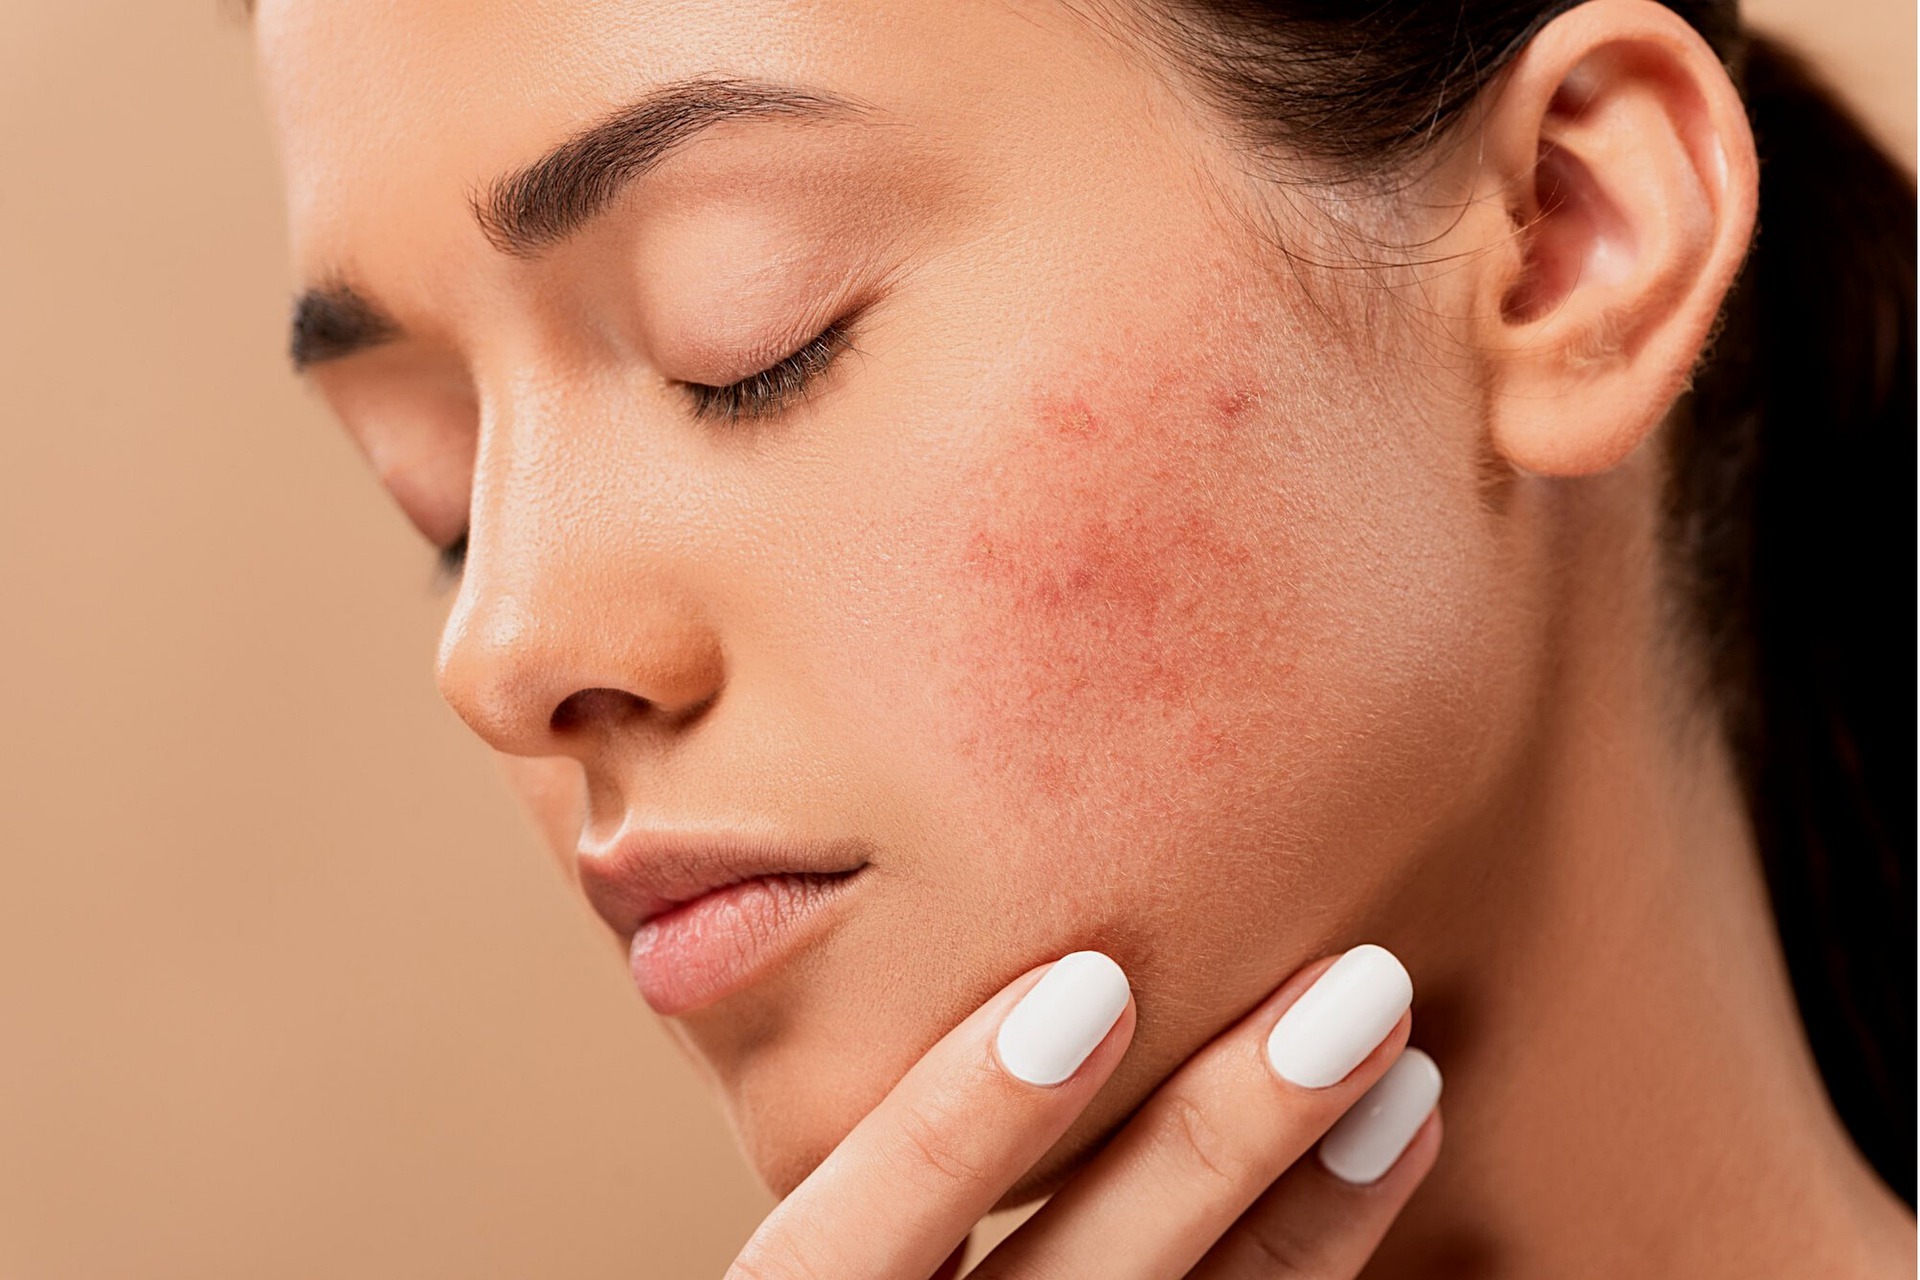 How to Treat Acne Scars